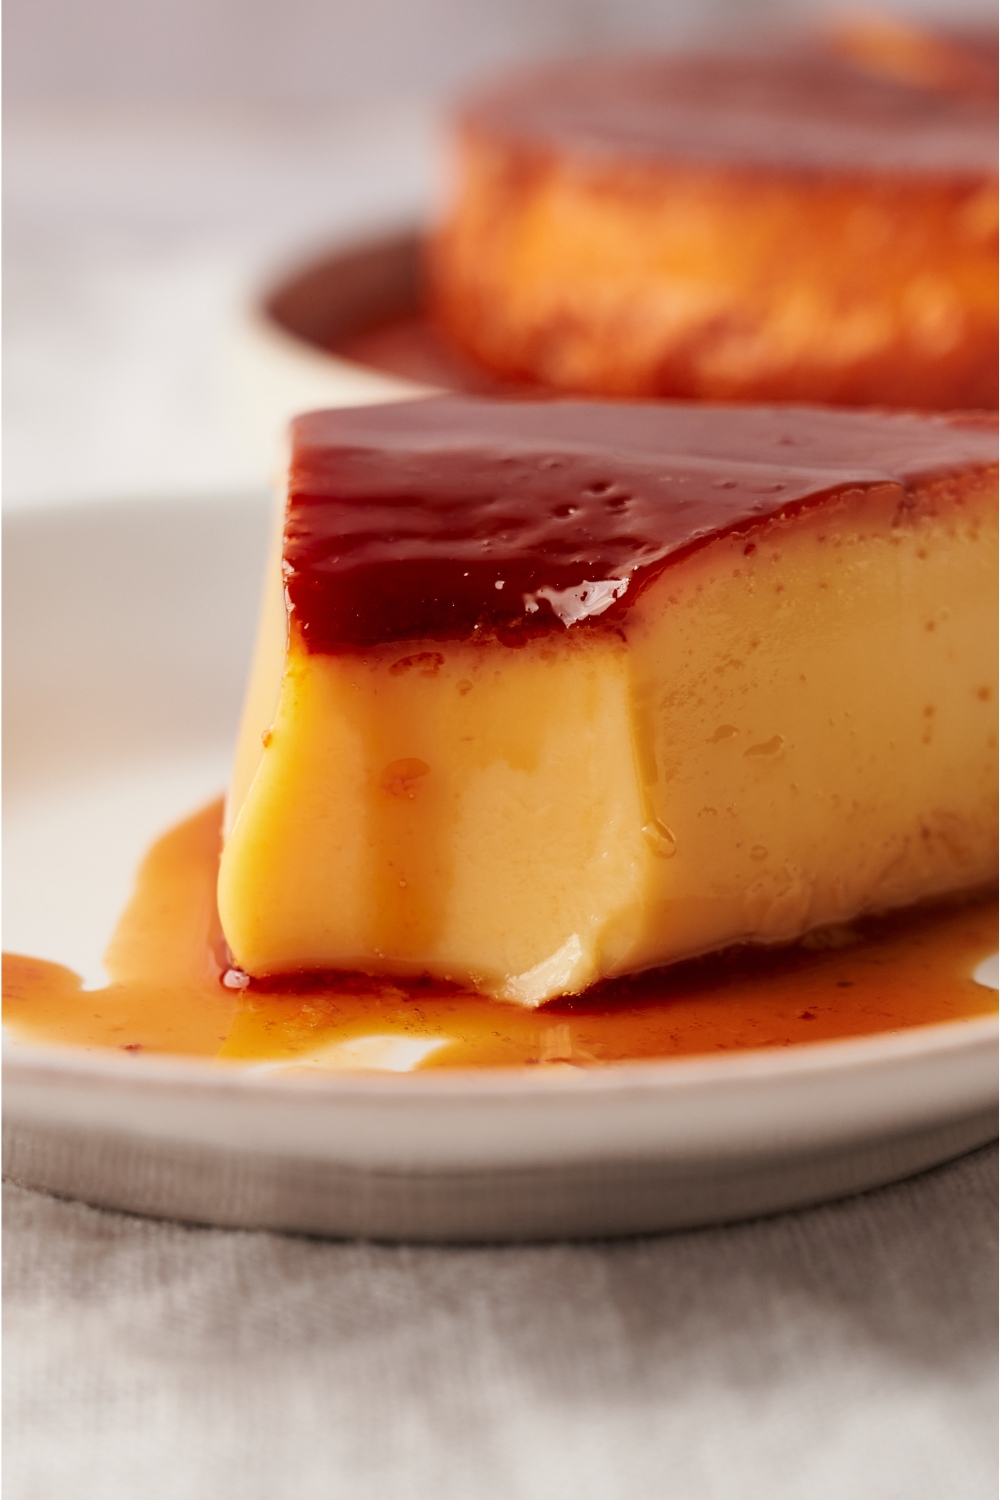 A small plate with a slice of flan and a bite taken out of it.